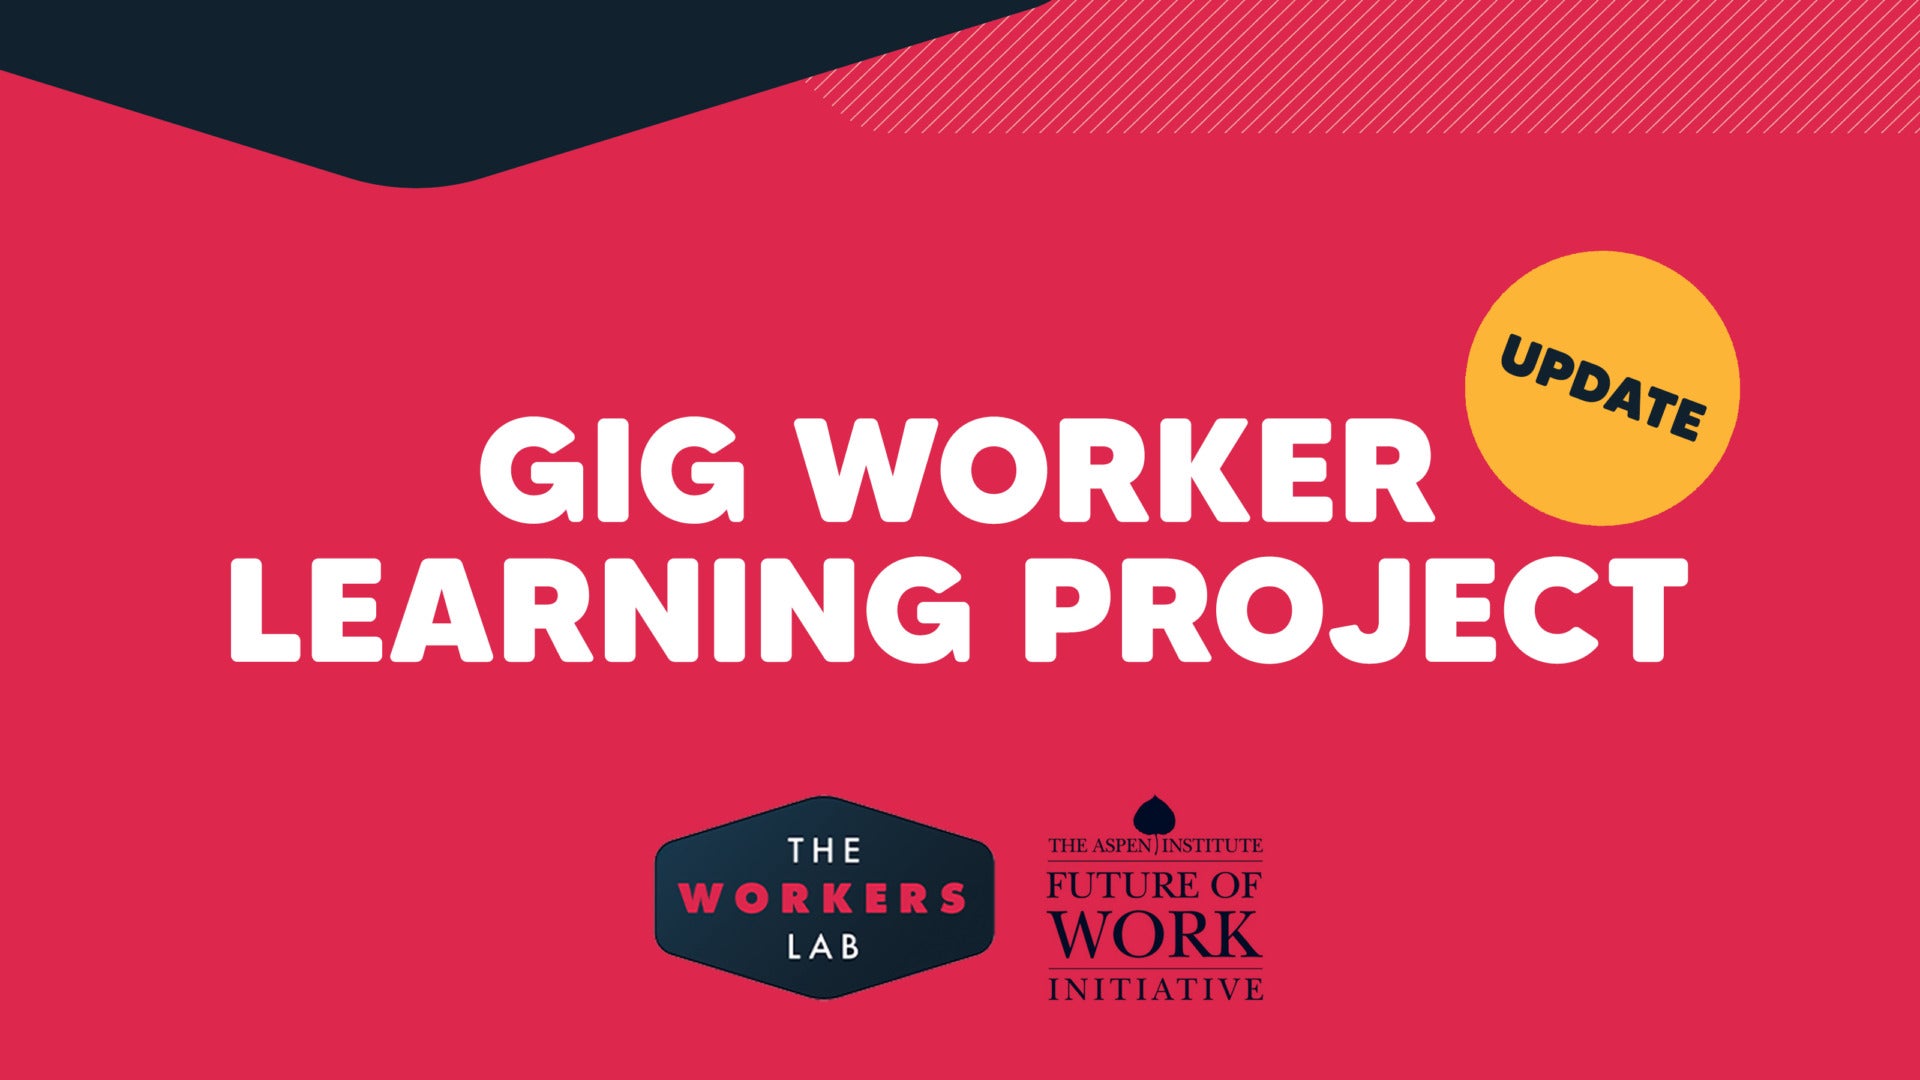 Gig Worker Learning Project Update